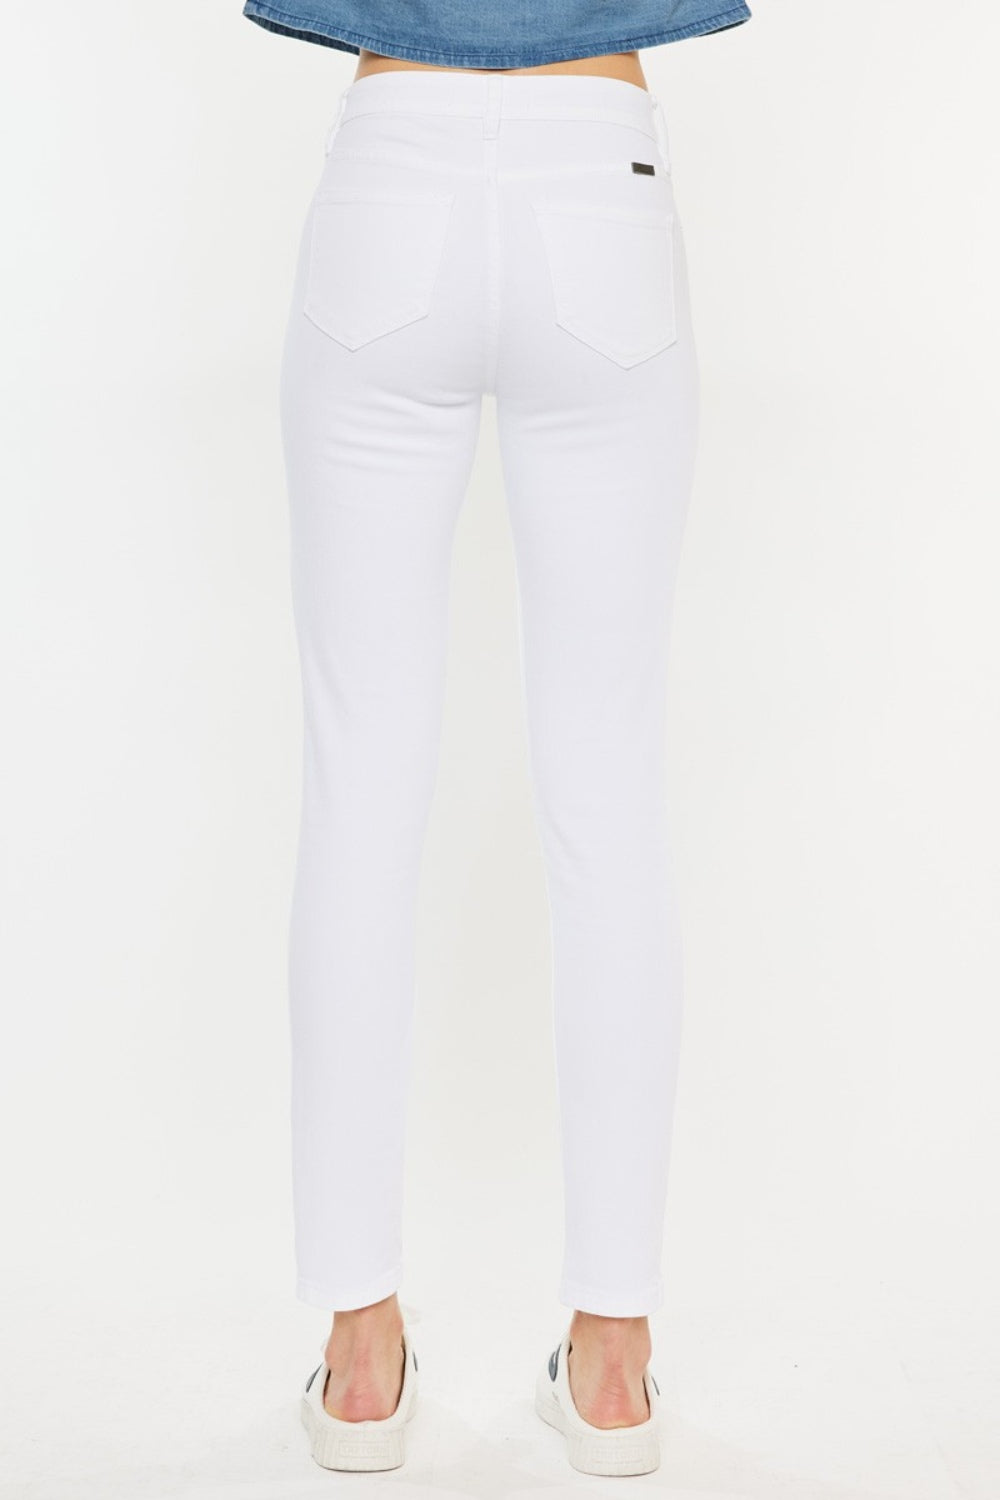 Kancan High Rise Ankle Skinny Jeans - House of Binx 